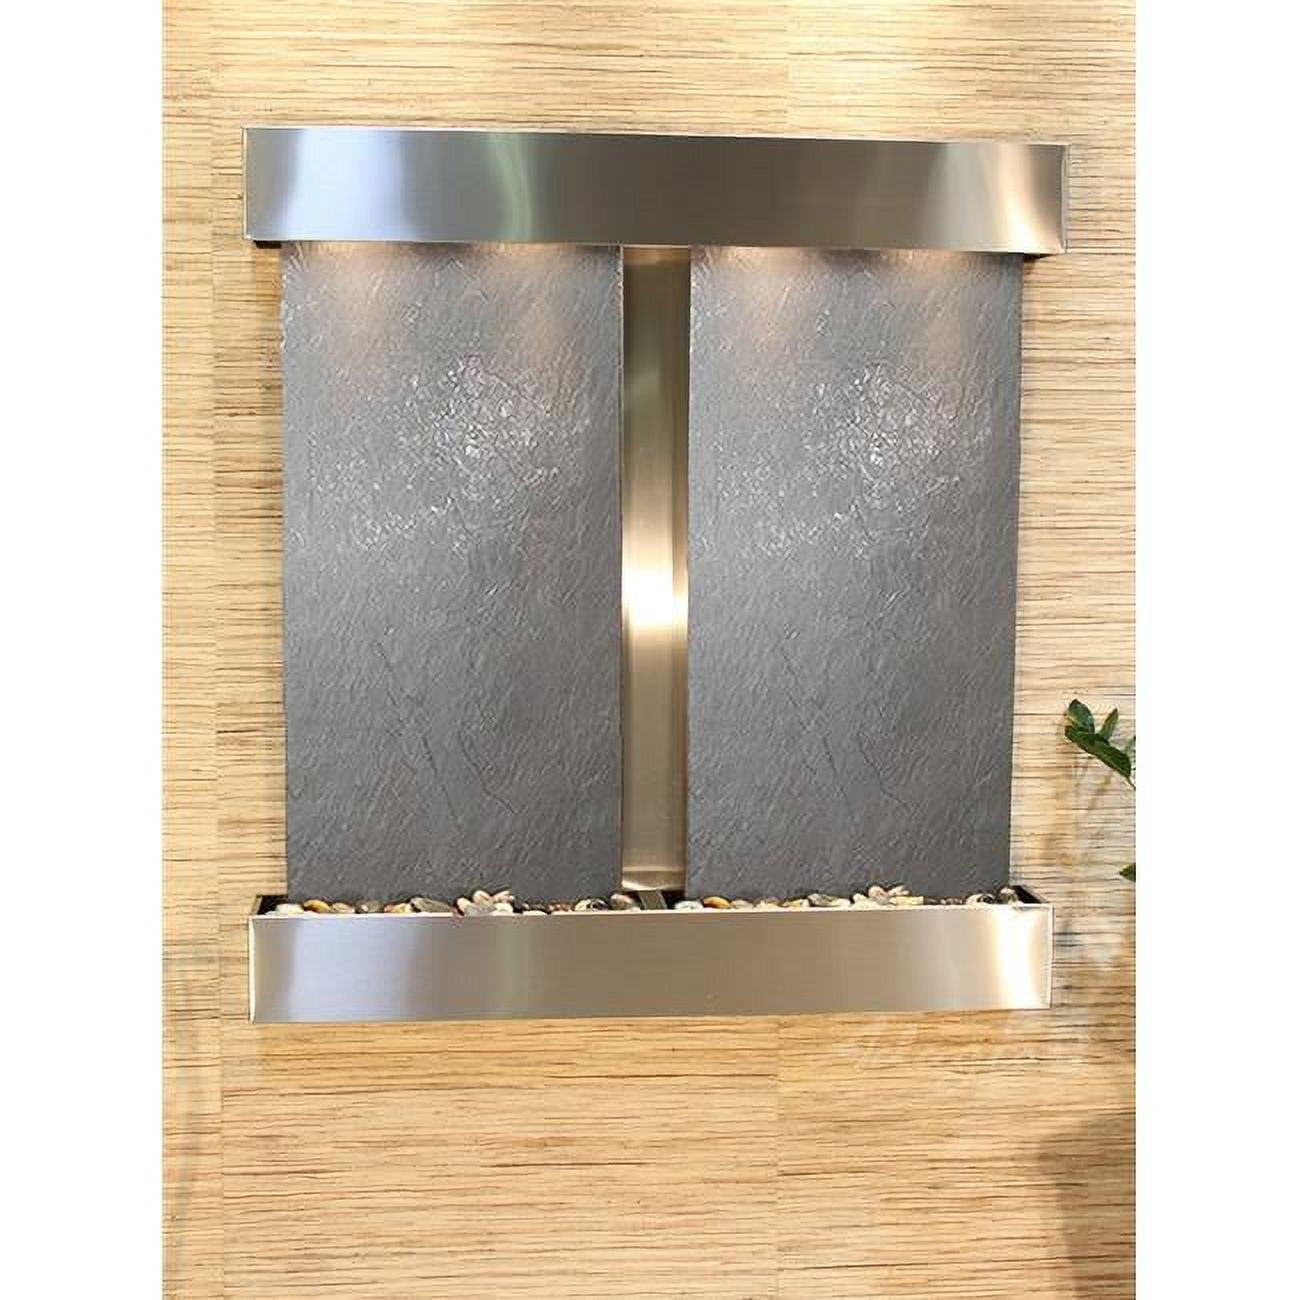 Picture of Adagio AFS2011 Aspen Falls Square Wall Fountain - Stainless Steel-Black Featherstone